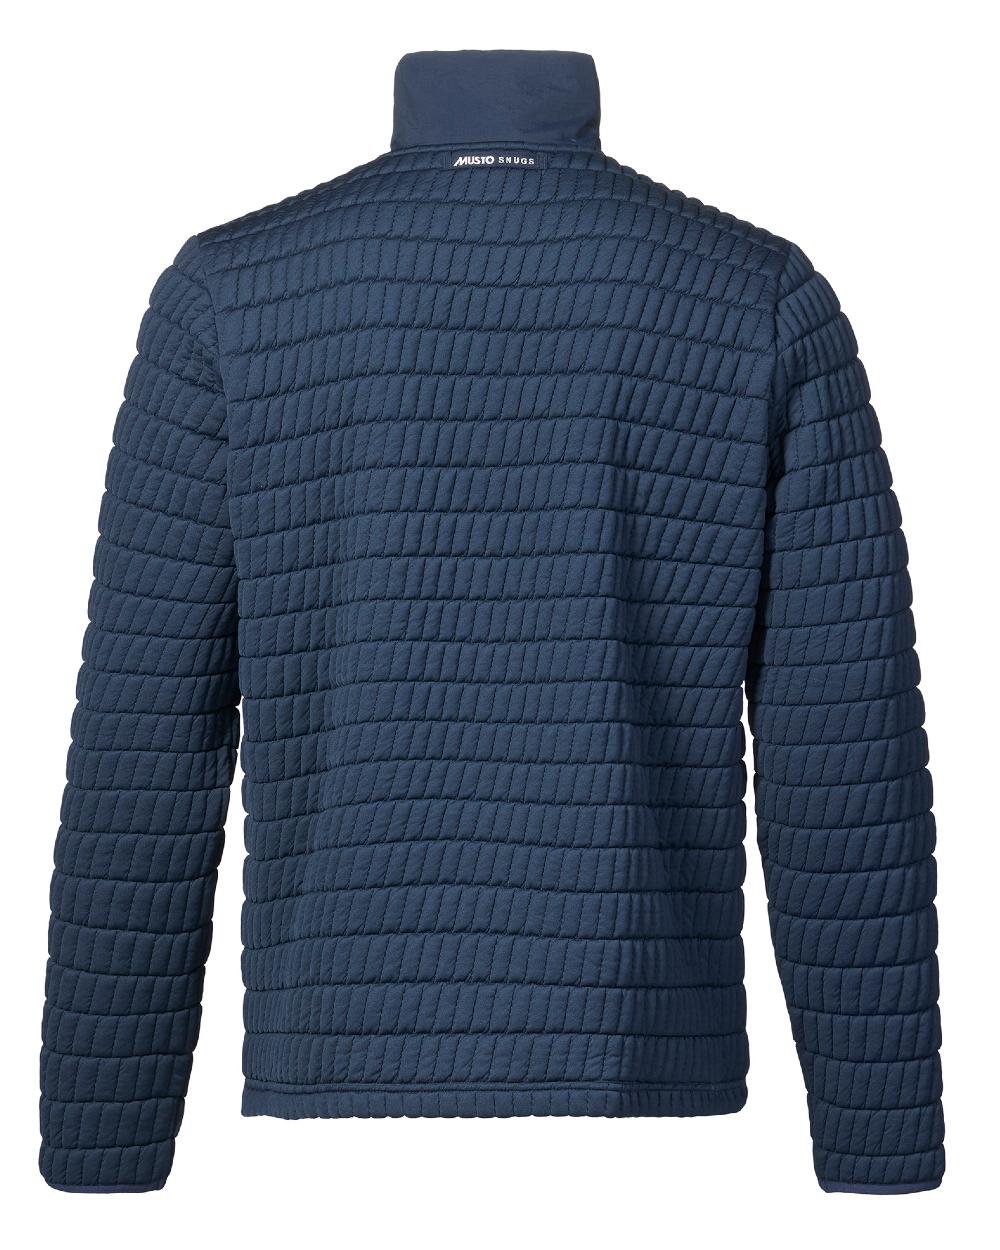 Navy Coloured Musto Mens Snug Pullover On A White Background 